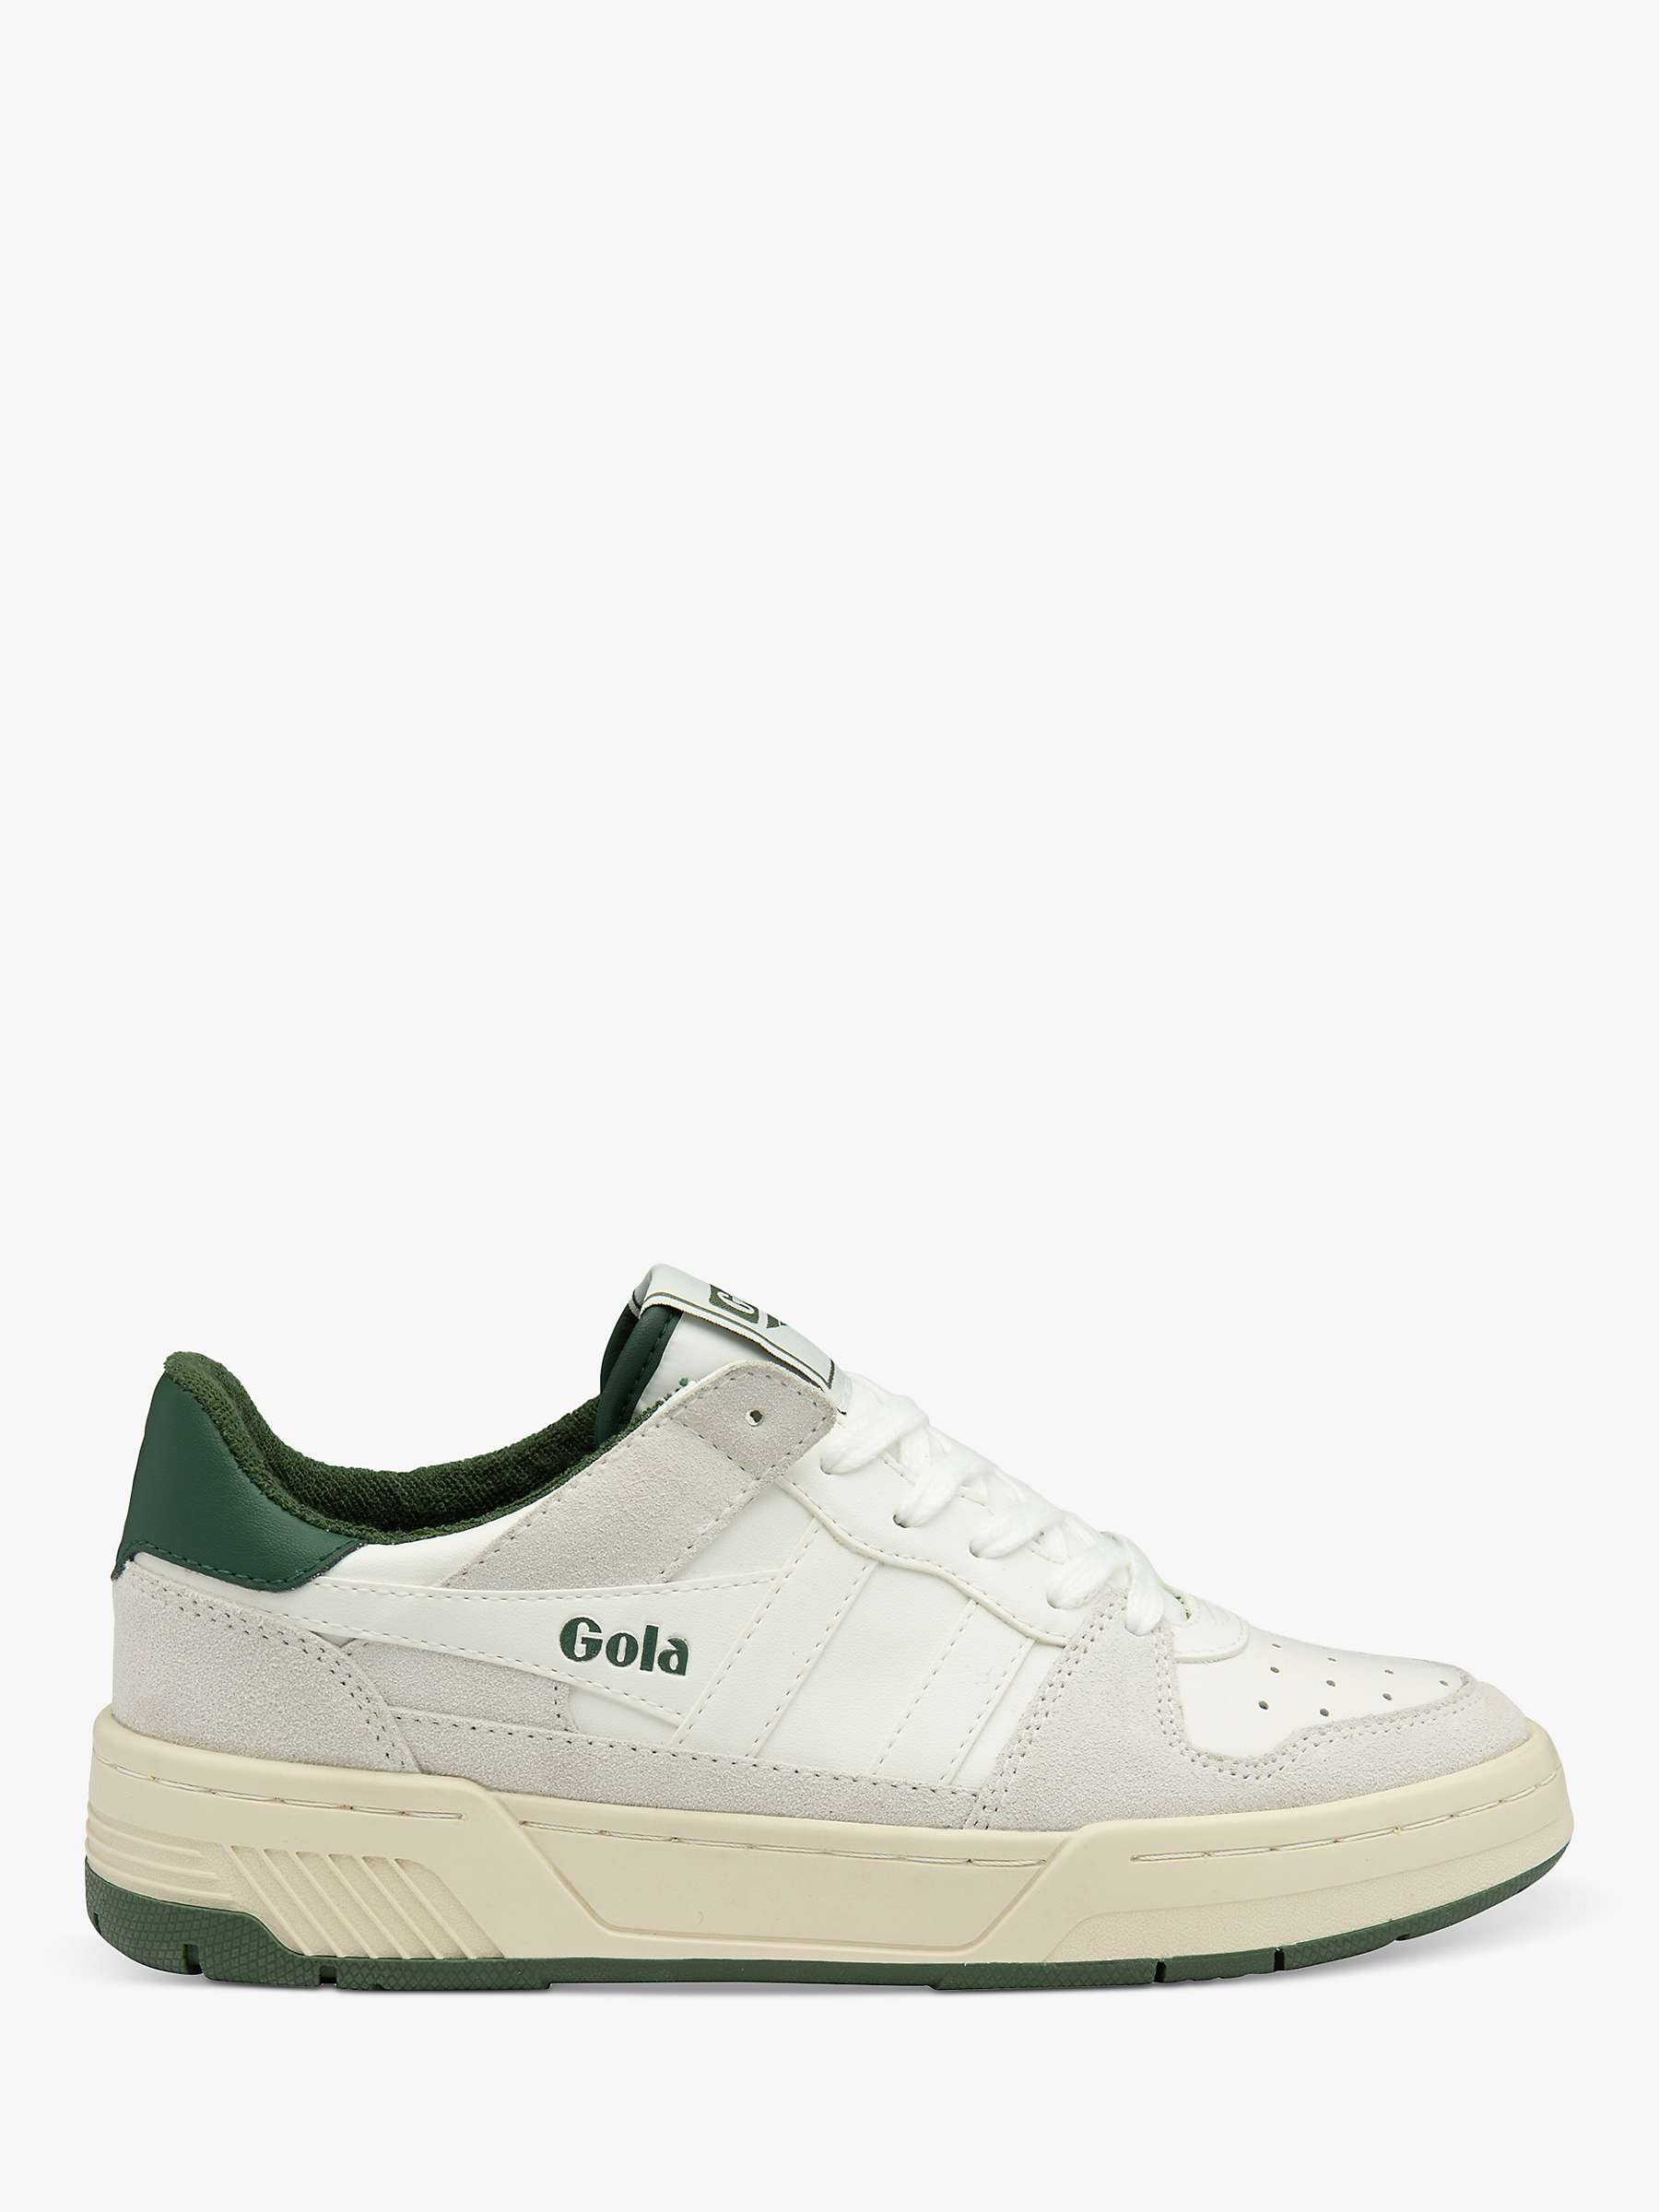 Buy Gola Classics Allcourt '86 Leather Trainers Online at johnlewis.com